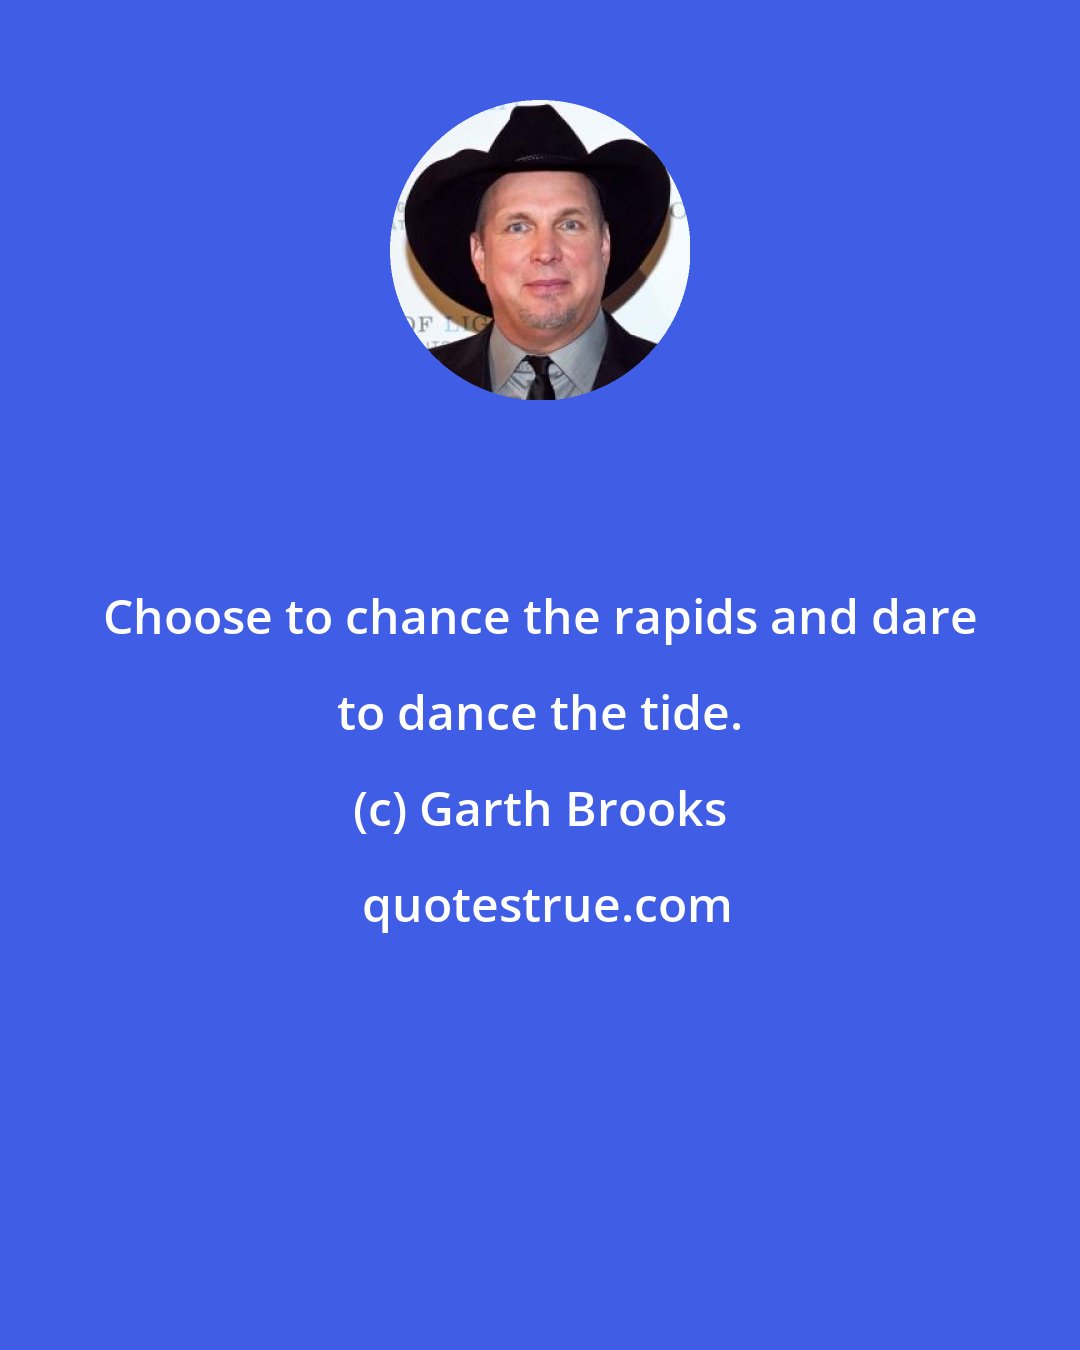 Garth Brooks: Choose to chance the rapids and dare to dance the tide.